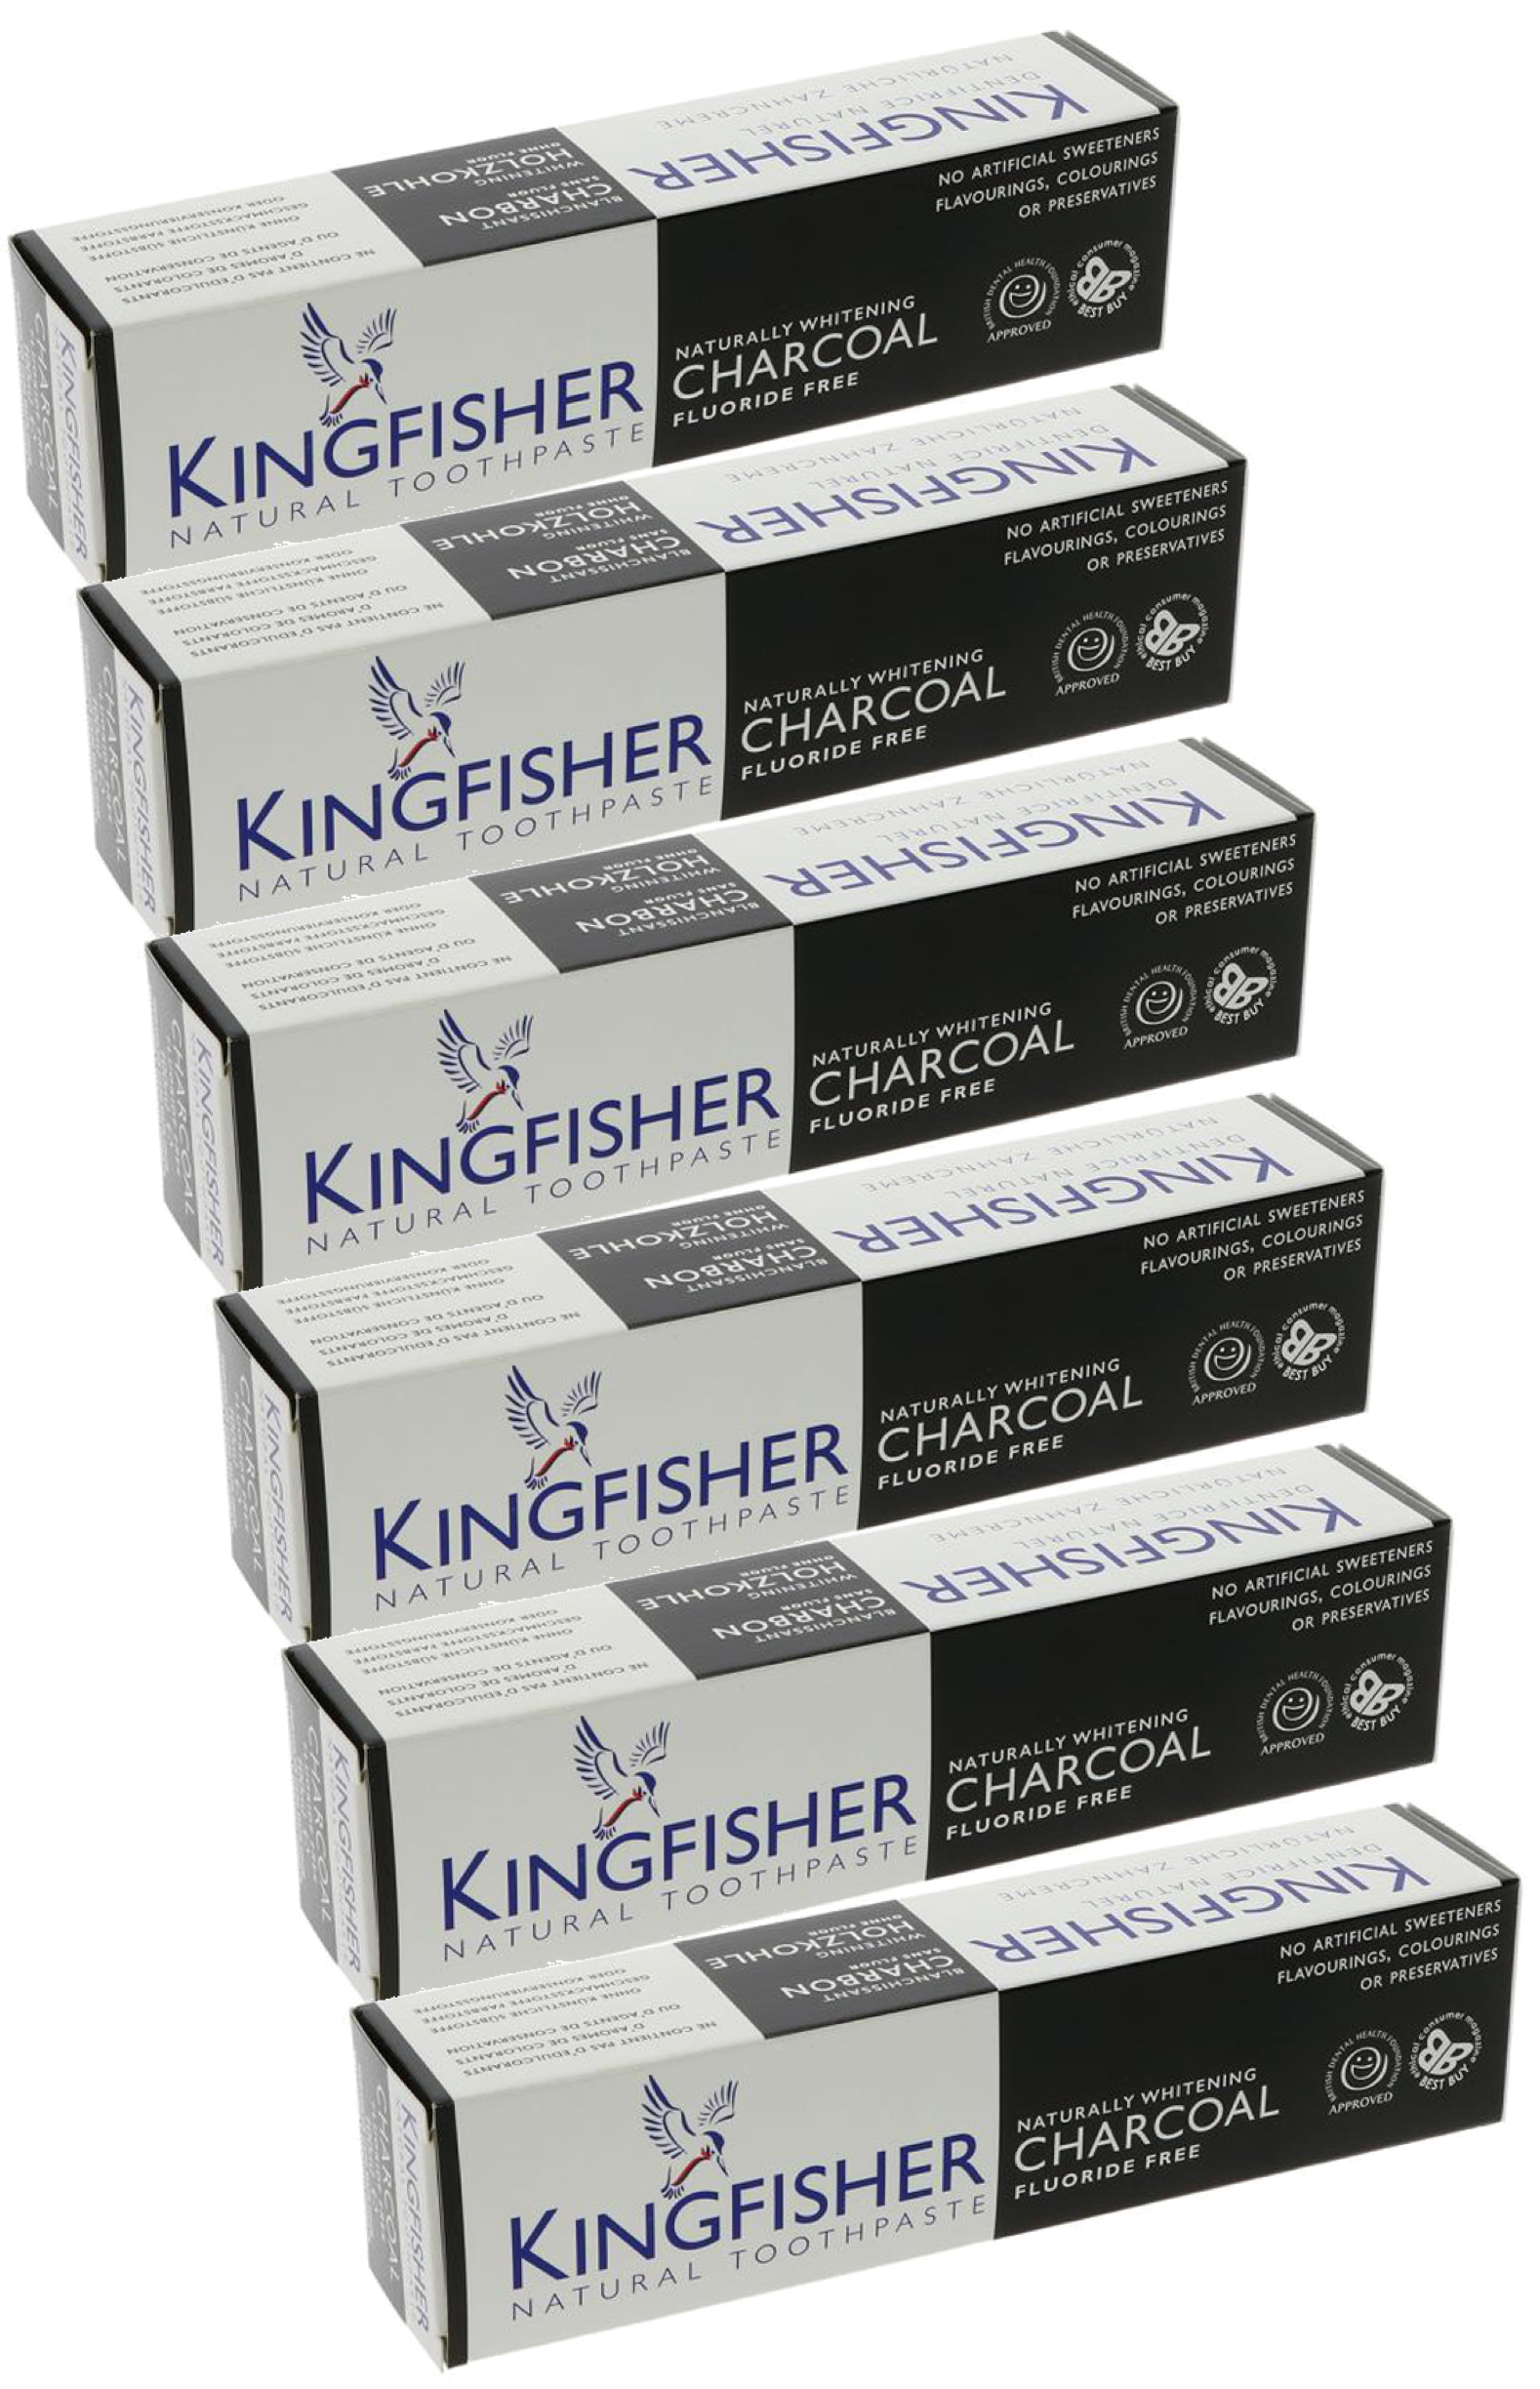 Kingfisher Toothpaste - Charcoal Naturally Whitening Fluoride Free Toothpaste (100ml) - Pack of 6